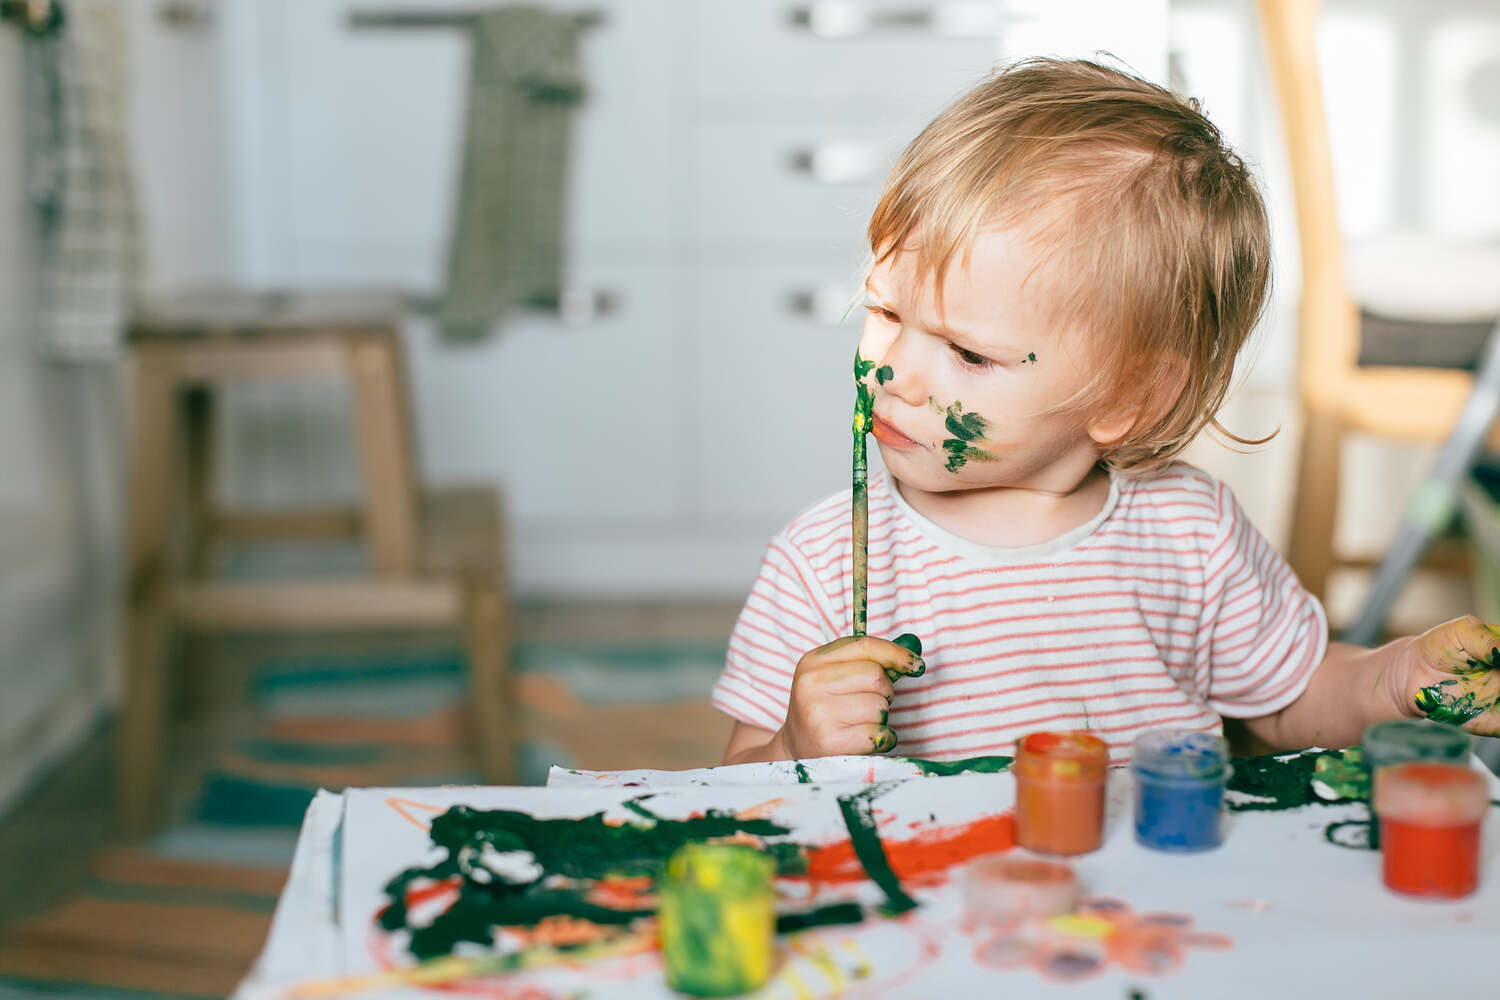 A toddler painting